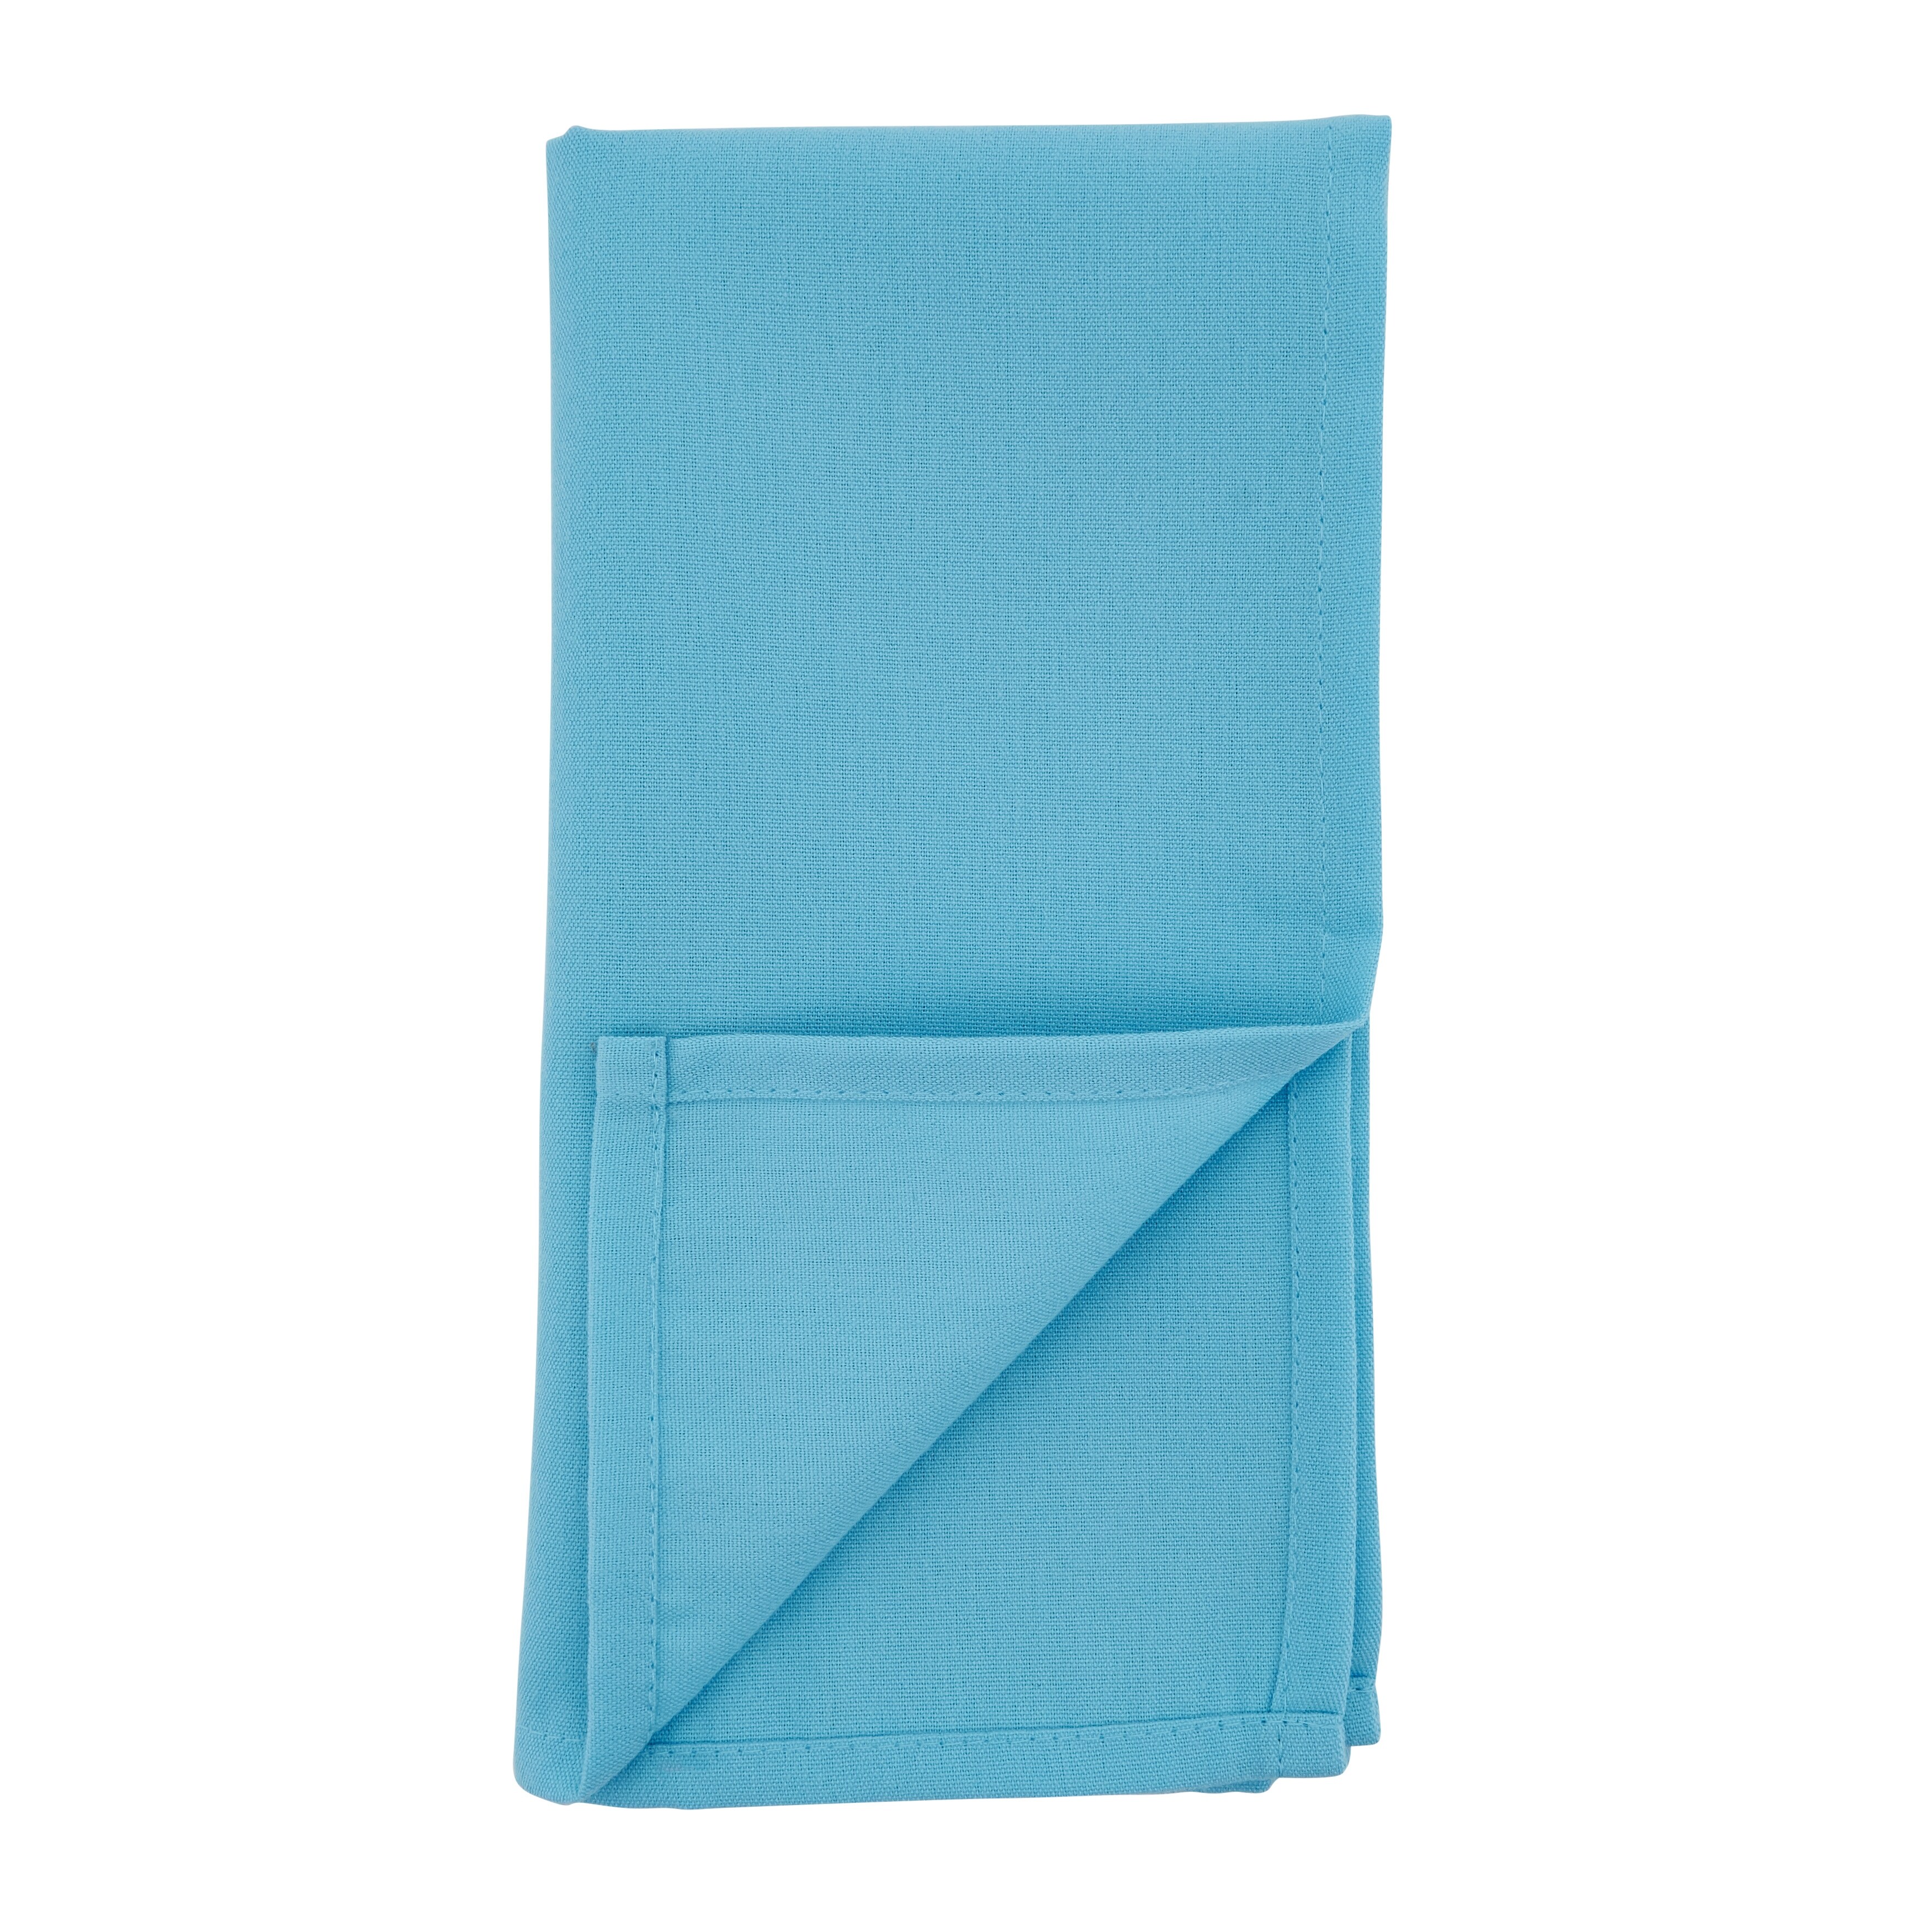 https://ak1.ostkcdn.com/images/products/is/images/direct/270254dfc9c41336fcc9087c94cd348d61653532/Everyday-Design-Napkin-%28Set-of-12%29.jpg